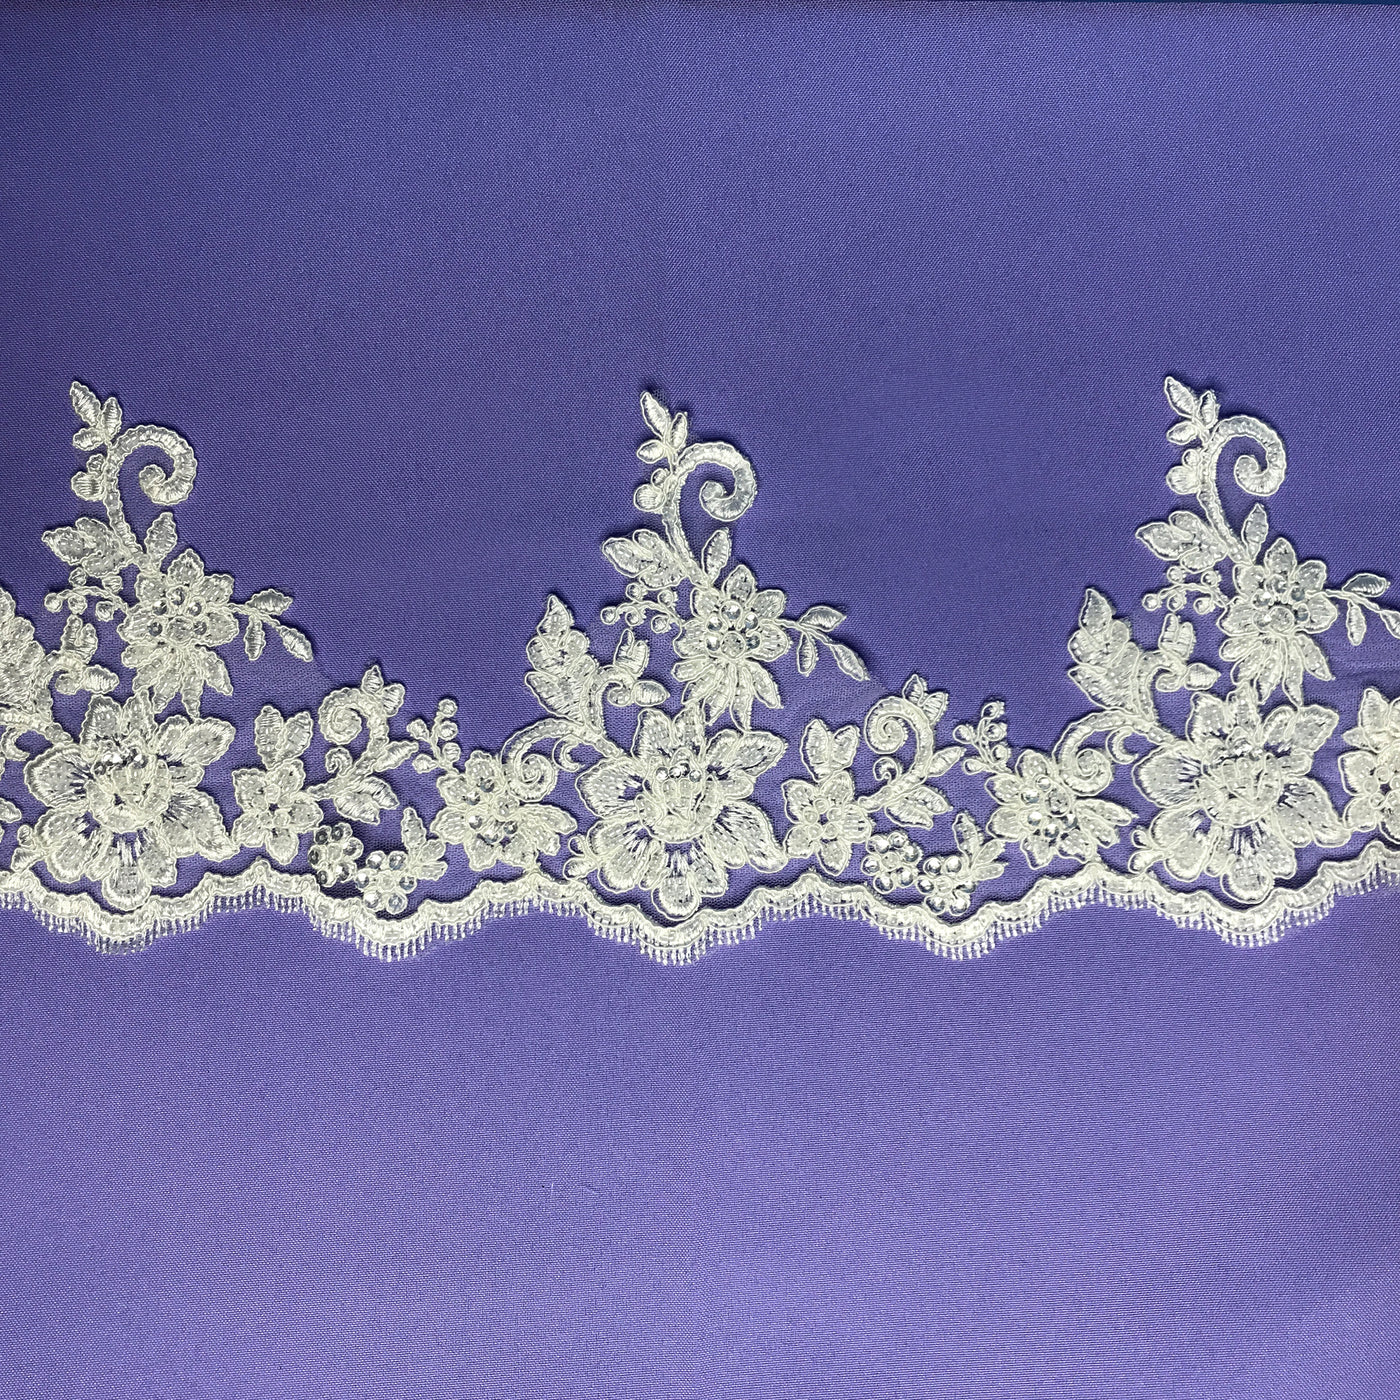 Embroidered, Corded & Beaded Floral trim on Net.  Sold by the yard  Lace Usa